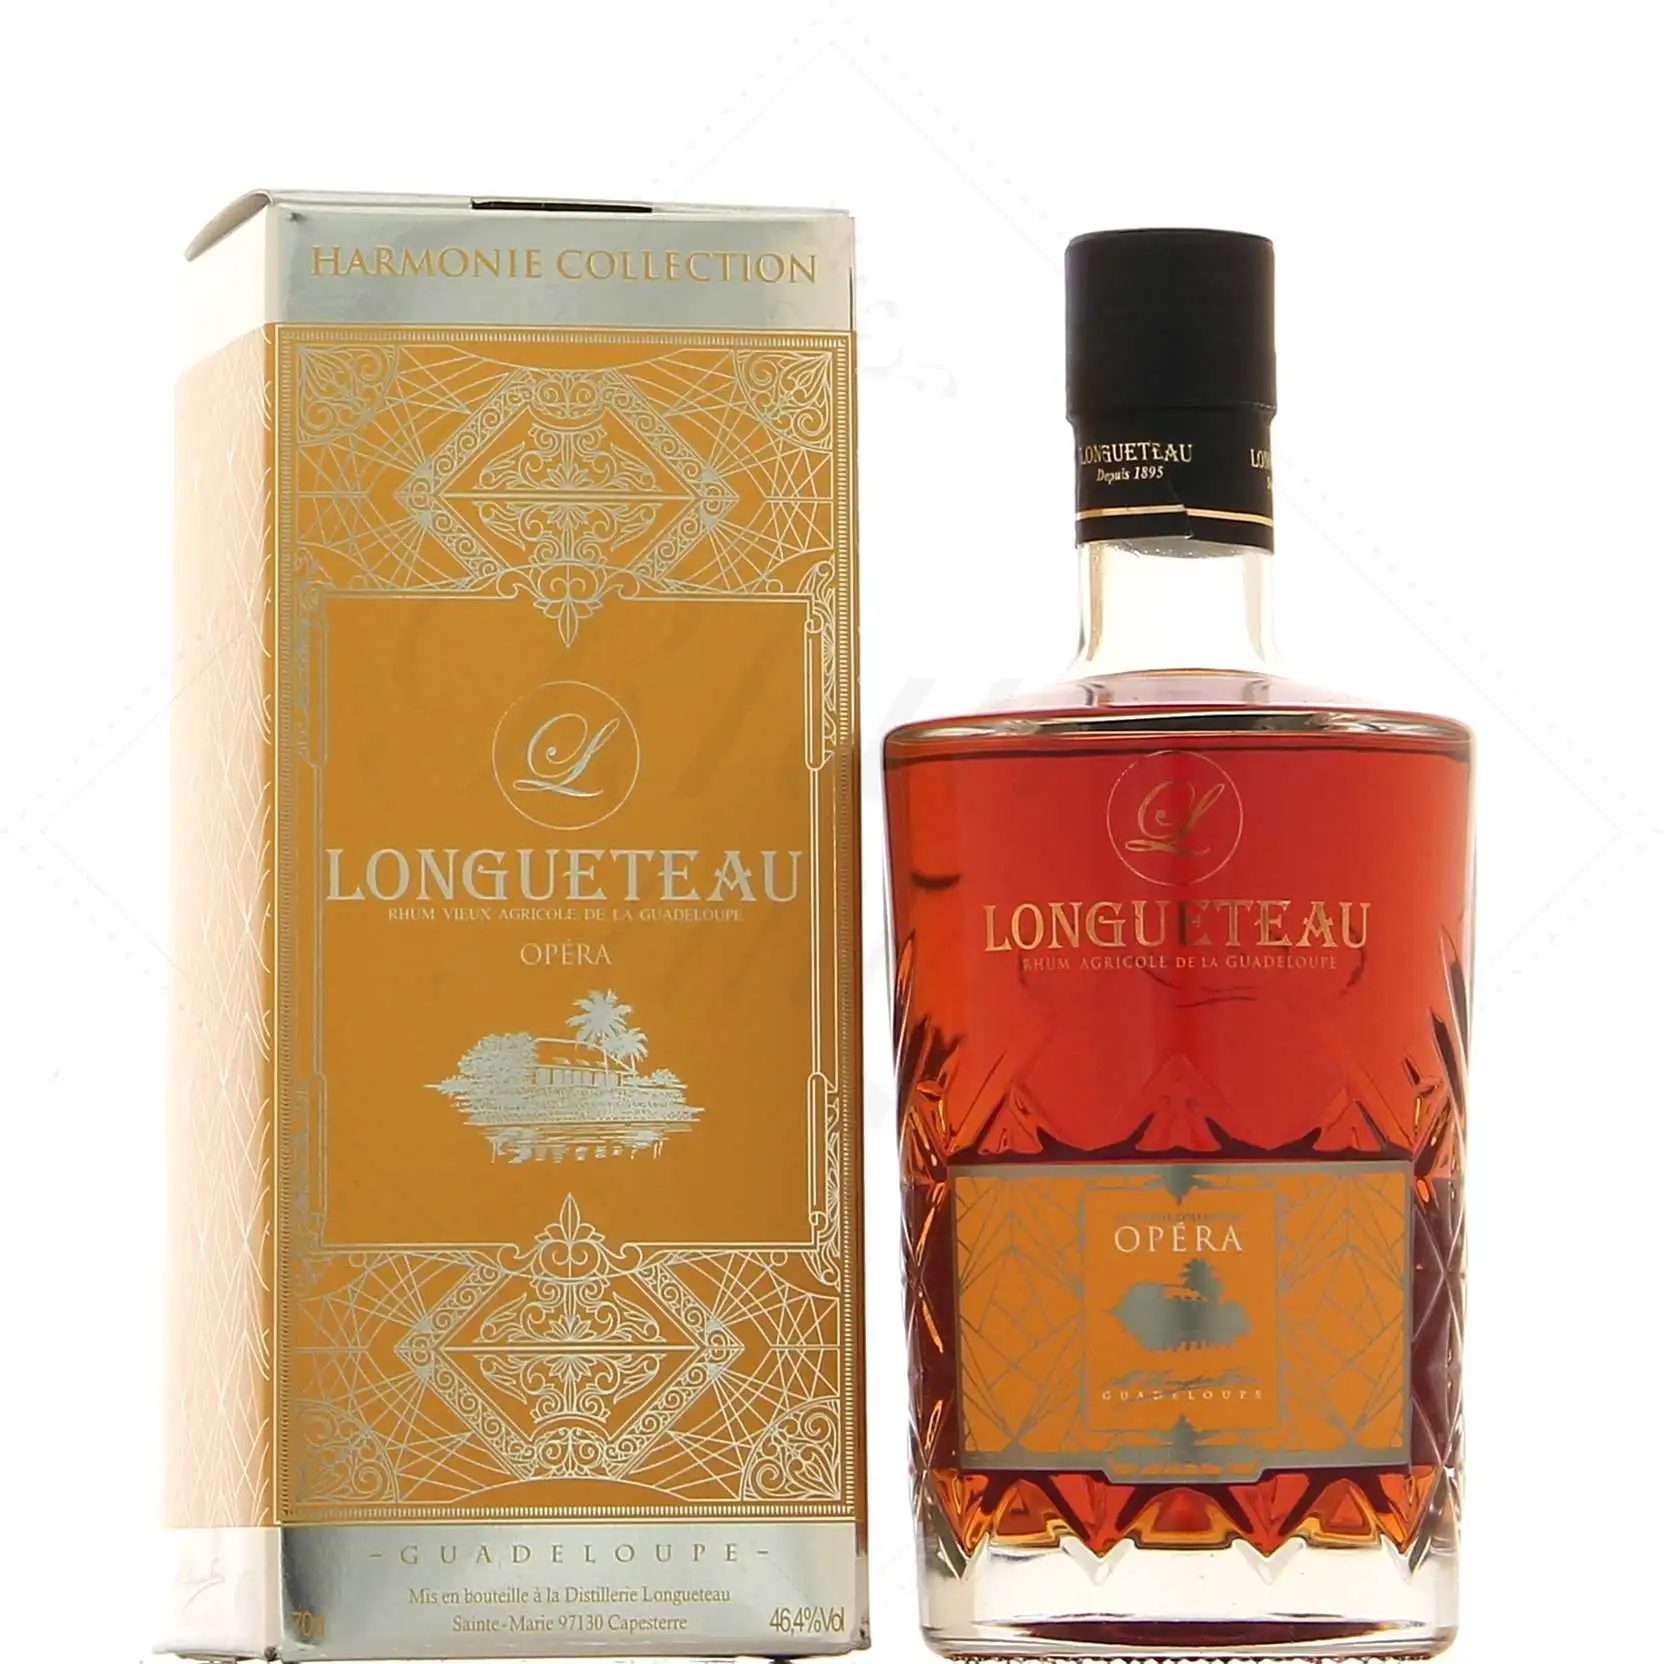 Image of the front of the bottle of the rum Opéra (Harmonie Collection)